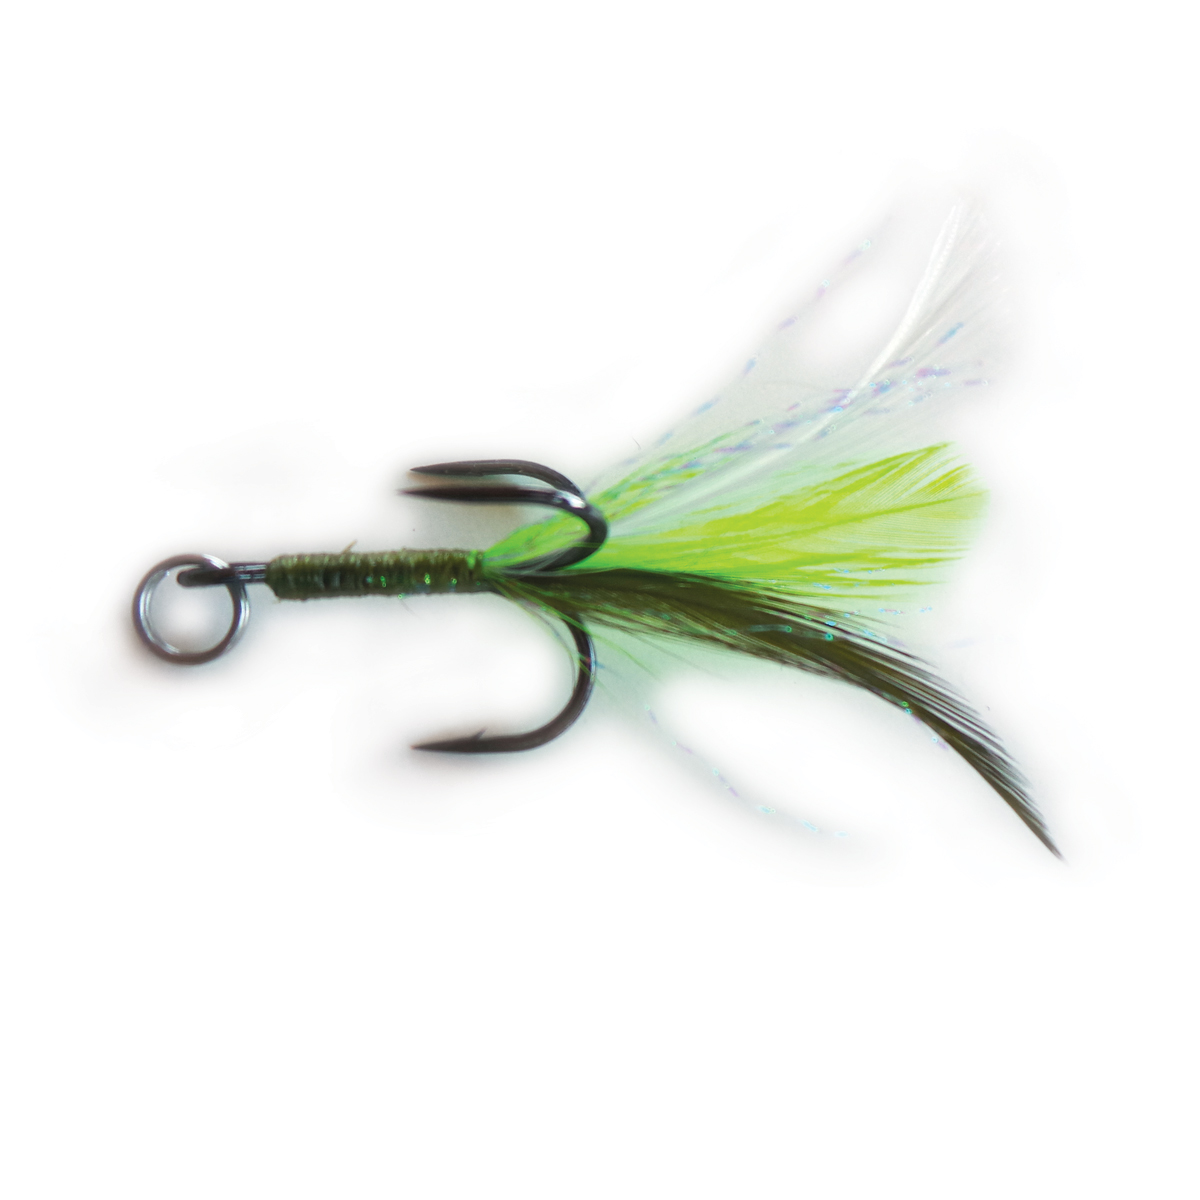 Gamakatsu G-Finesse Feathered Treble MH, Feathered Treble, 56% OFF